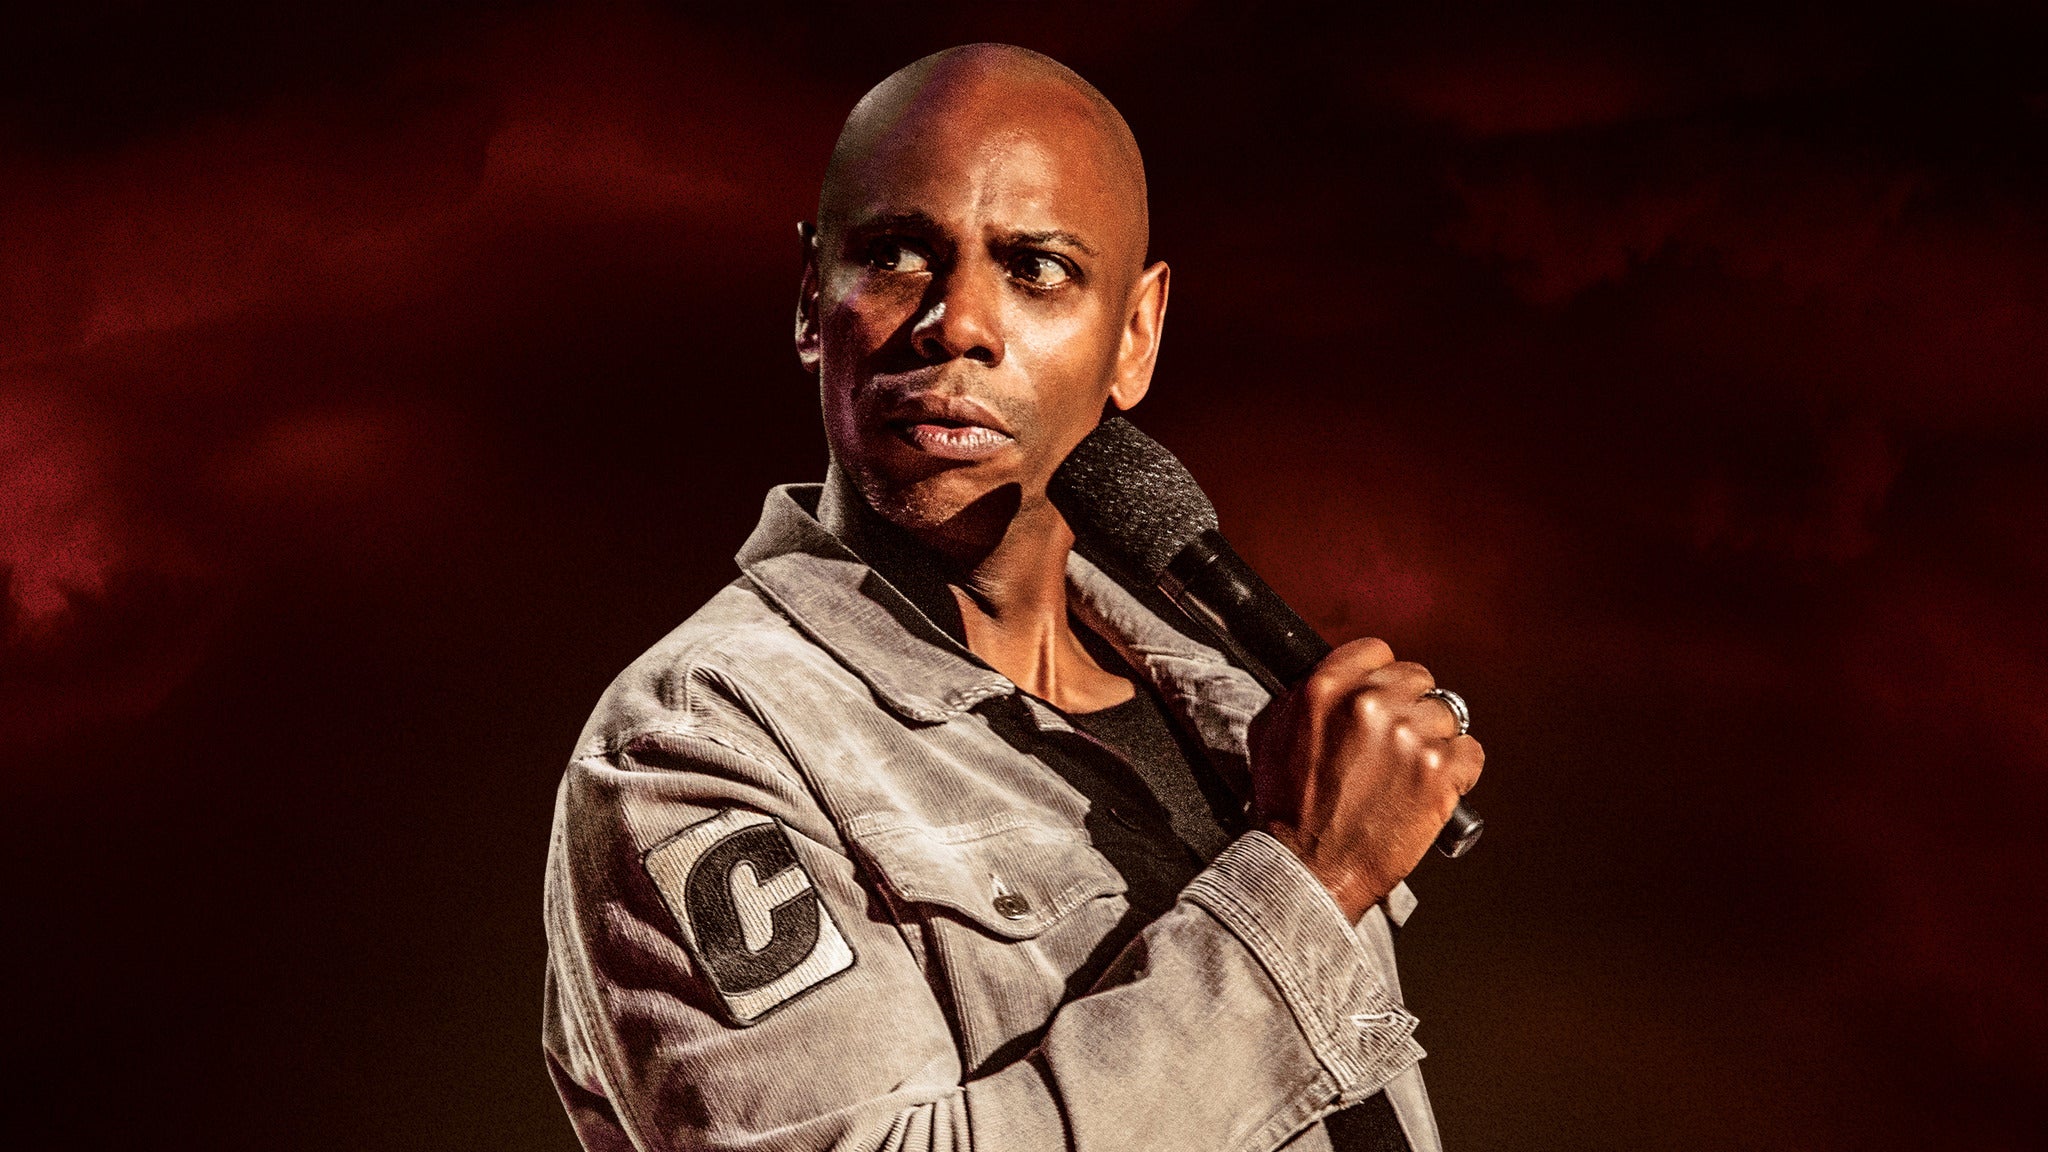 "Untitled" Dave Chappelle Documentary in Hollywood promo photo for Venue presale offer code